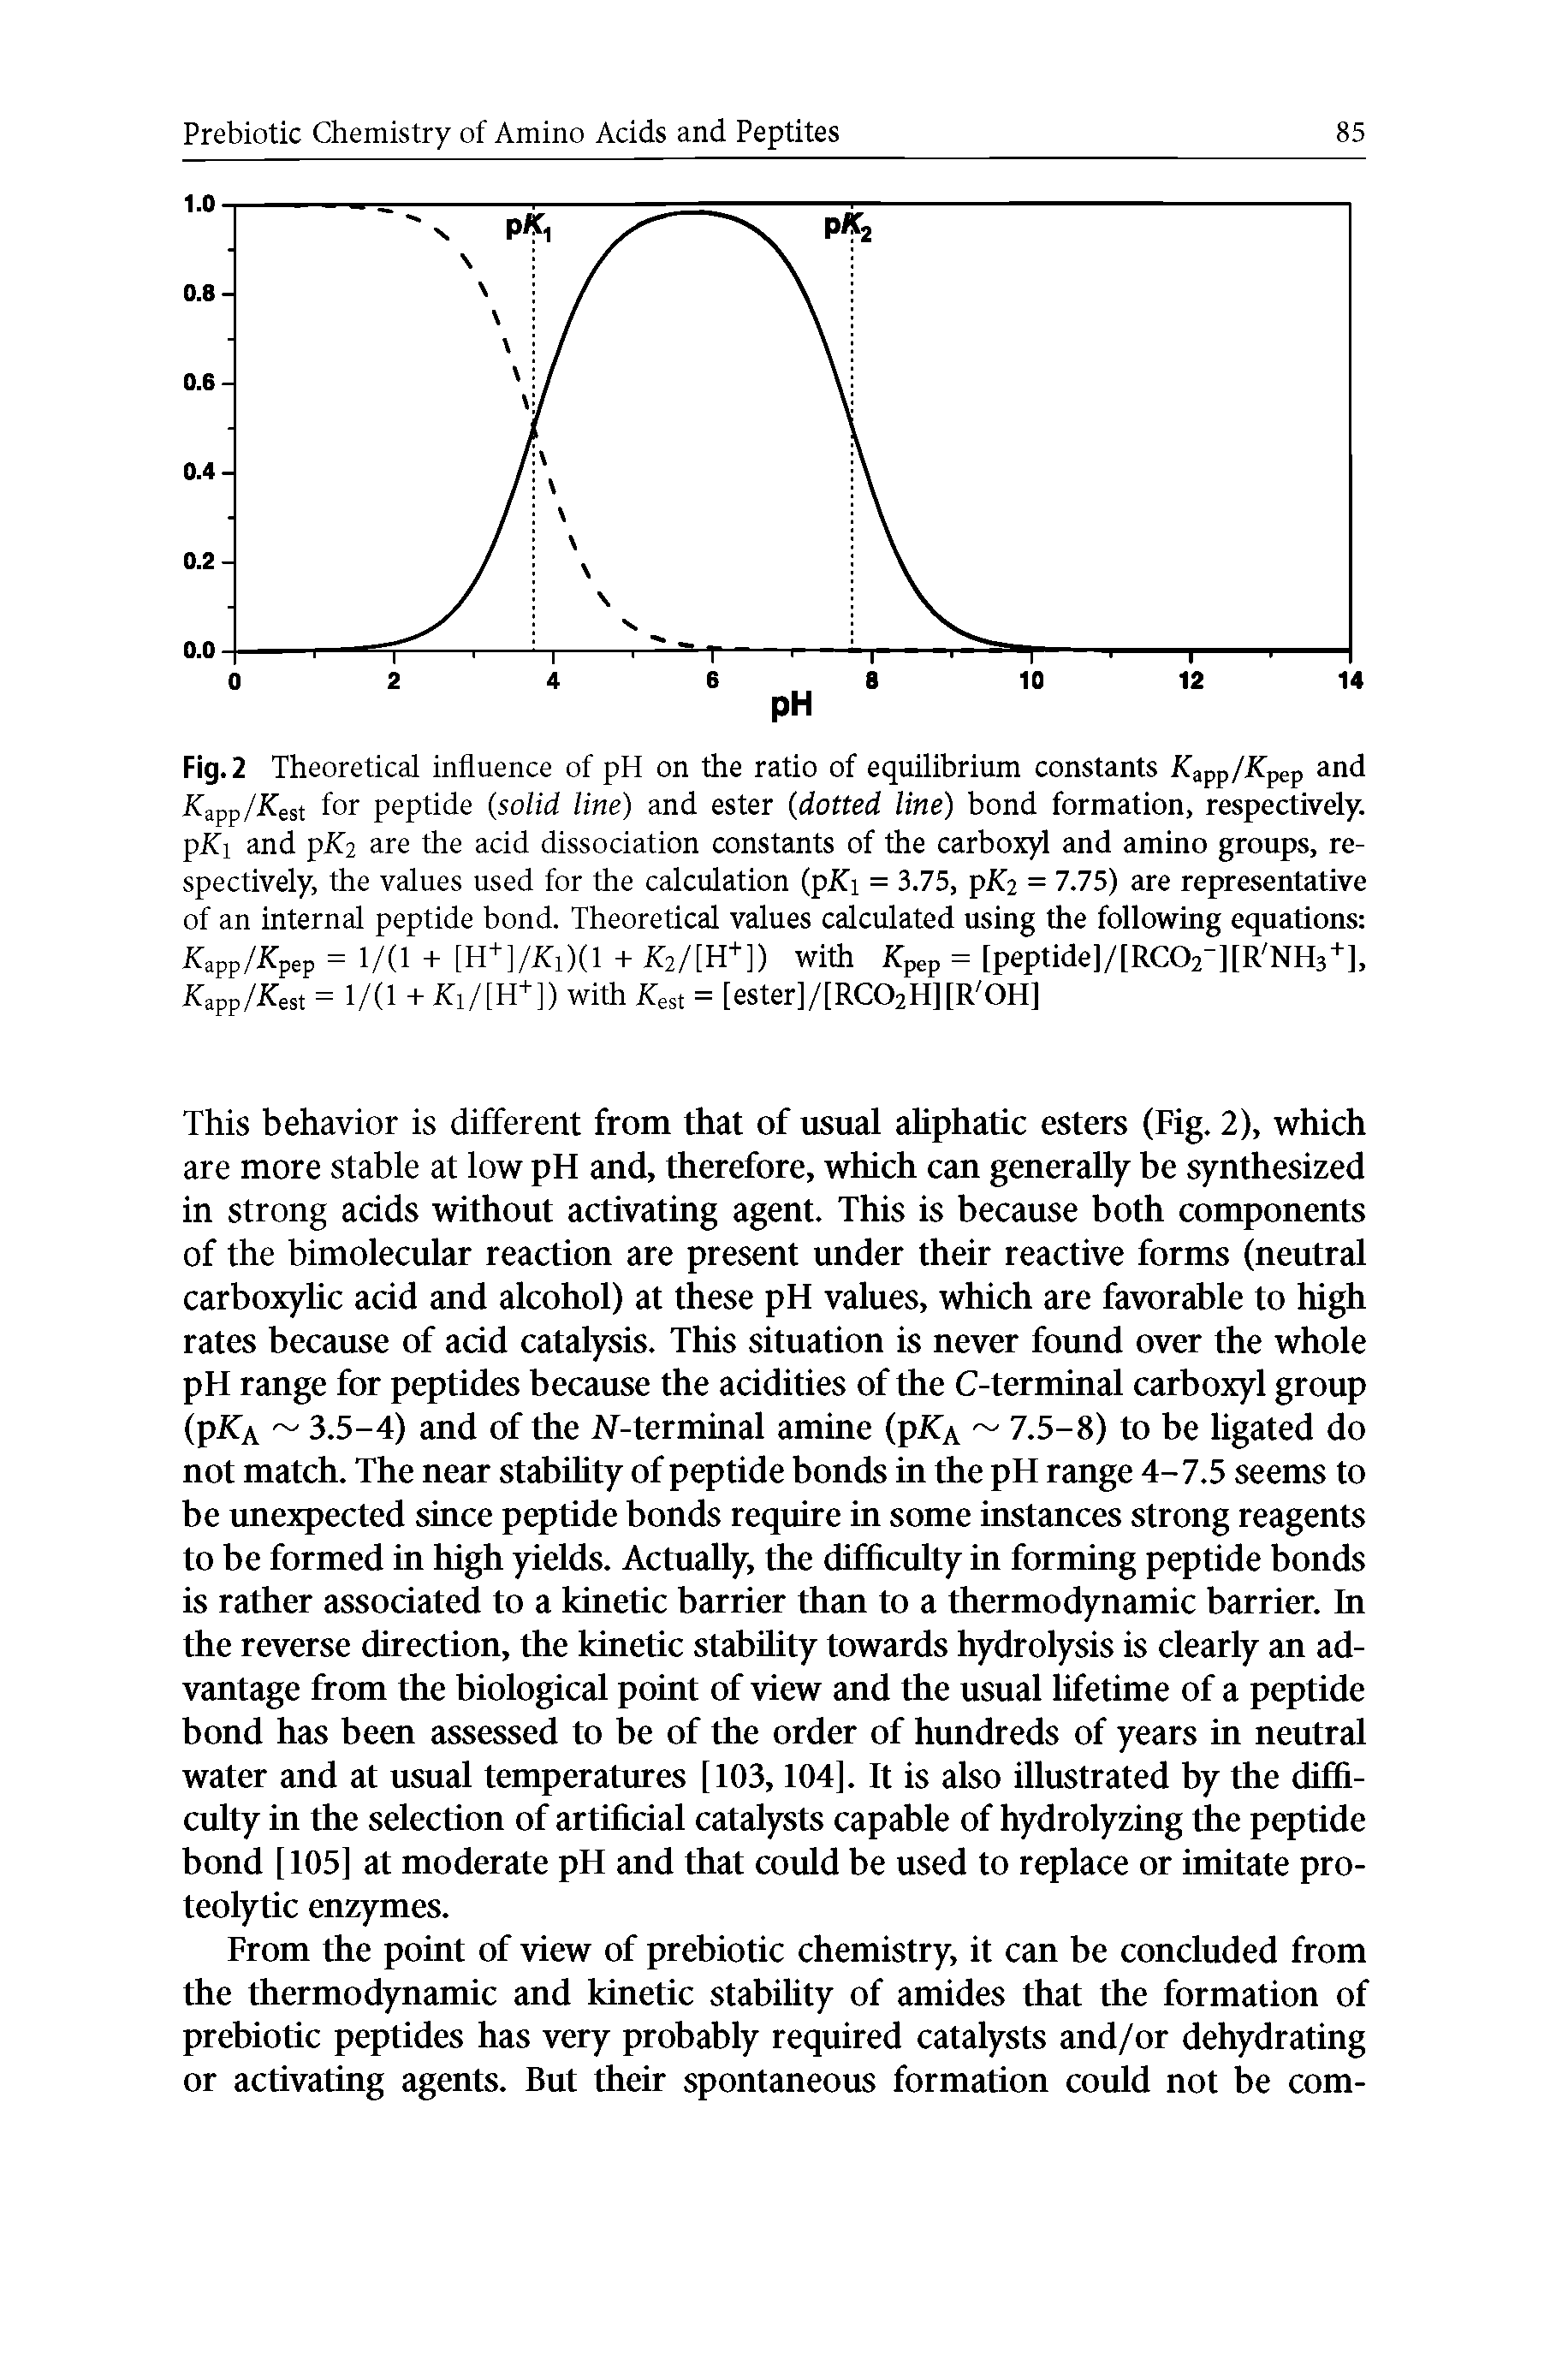 Fig. 2 Theoretical influence of pH on the ratio of equilibrium constants FCapp/- pep and Kapp/Kest for peptide (solid line) and ester (dotted line) bond formation, respectively. pKi and pK2 are the acid dissociation constants of the carboxyl and amino groups, respectively, the values used for the calculation (pi i = 3.75, pK2 = 7.75) are representative of an internal peptide bond. Theoretical values calculated using the following equations Kapp/ffpep = 1/(1 + [H+]/fCi)(l + K2/[H+D with Kpep = [peptide]/[RC02-][R NH3+], Kapp/ffest = 1/(1 + Ki/[H+]) with Kest = [ester]/[RC02H][R OH]...